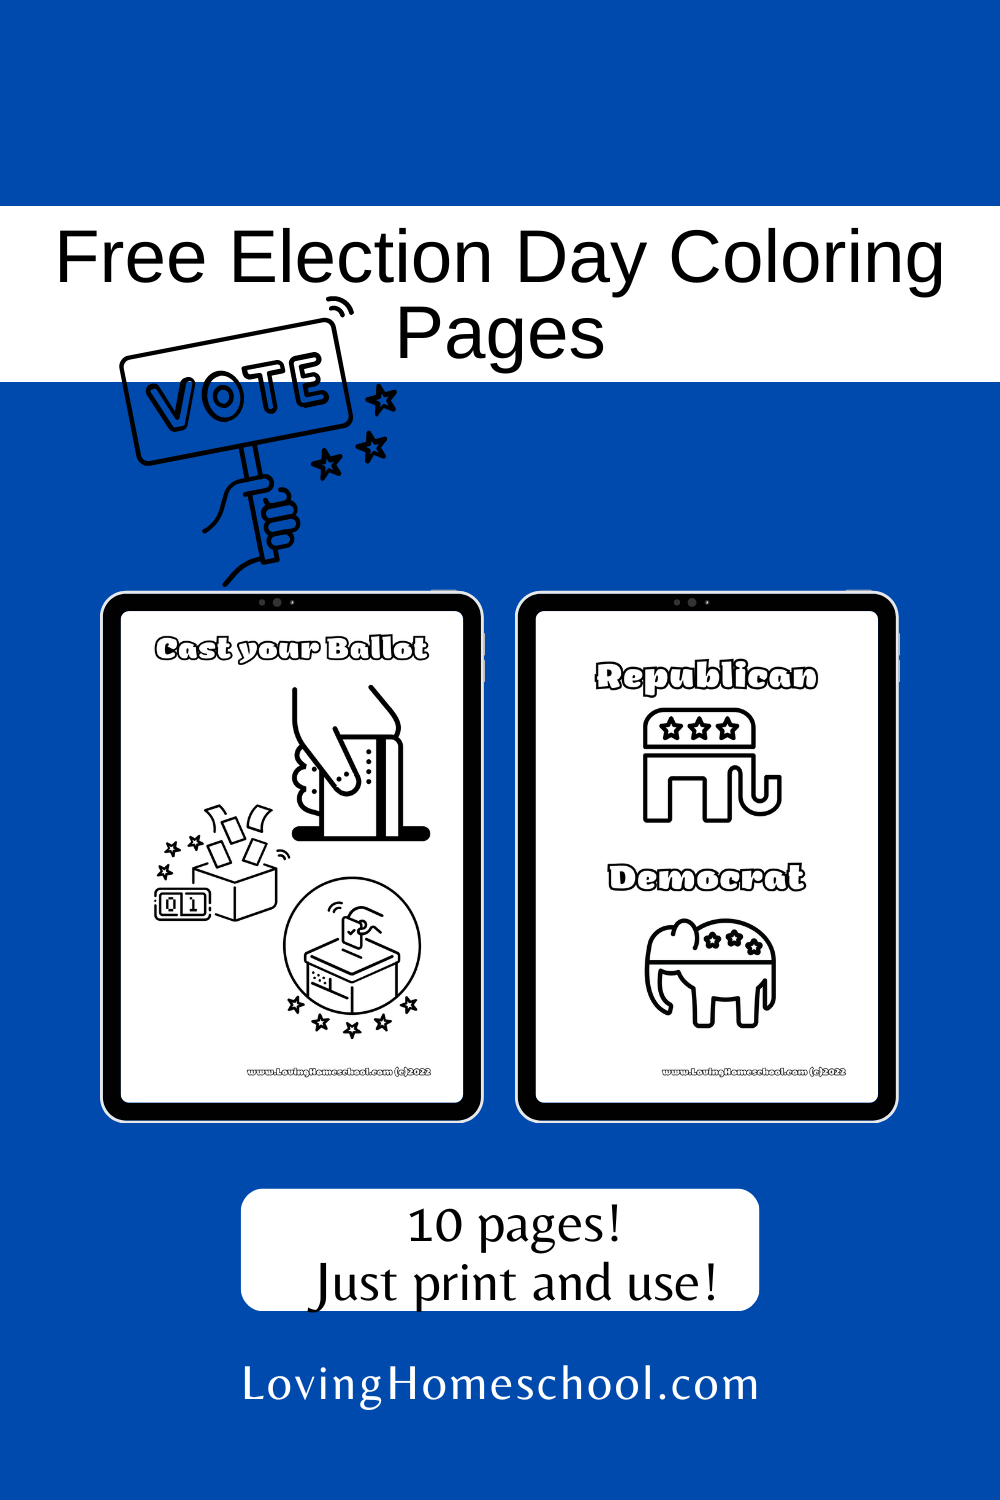 Free Election Day Coloring Pages Pinterest Pin